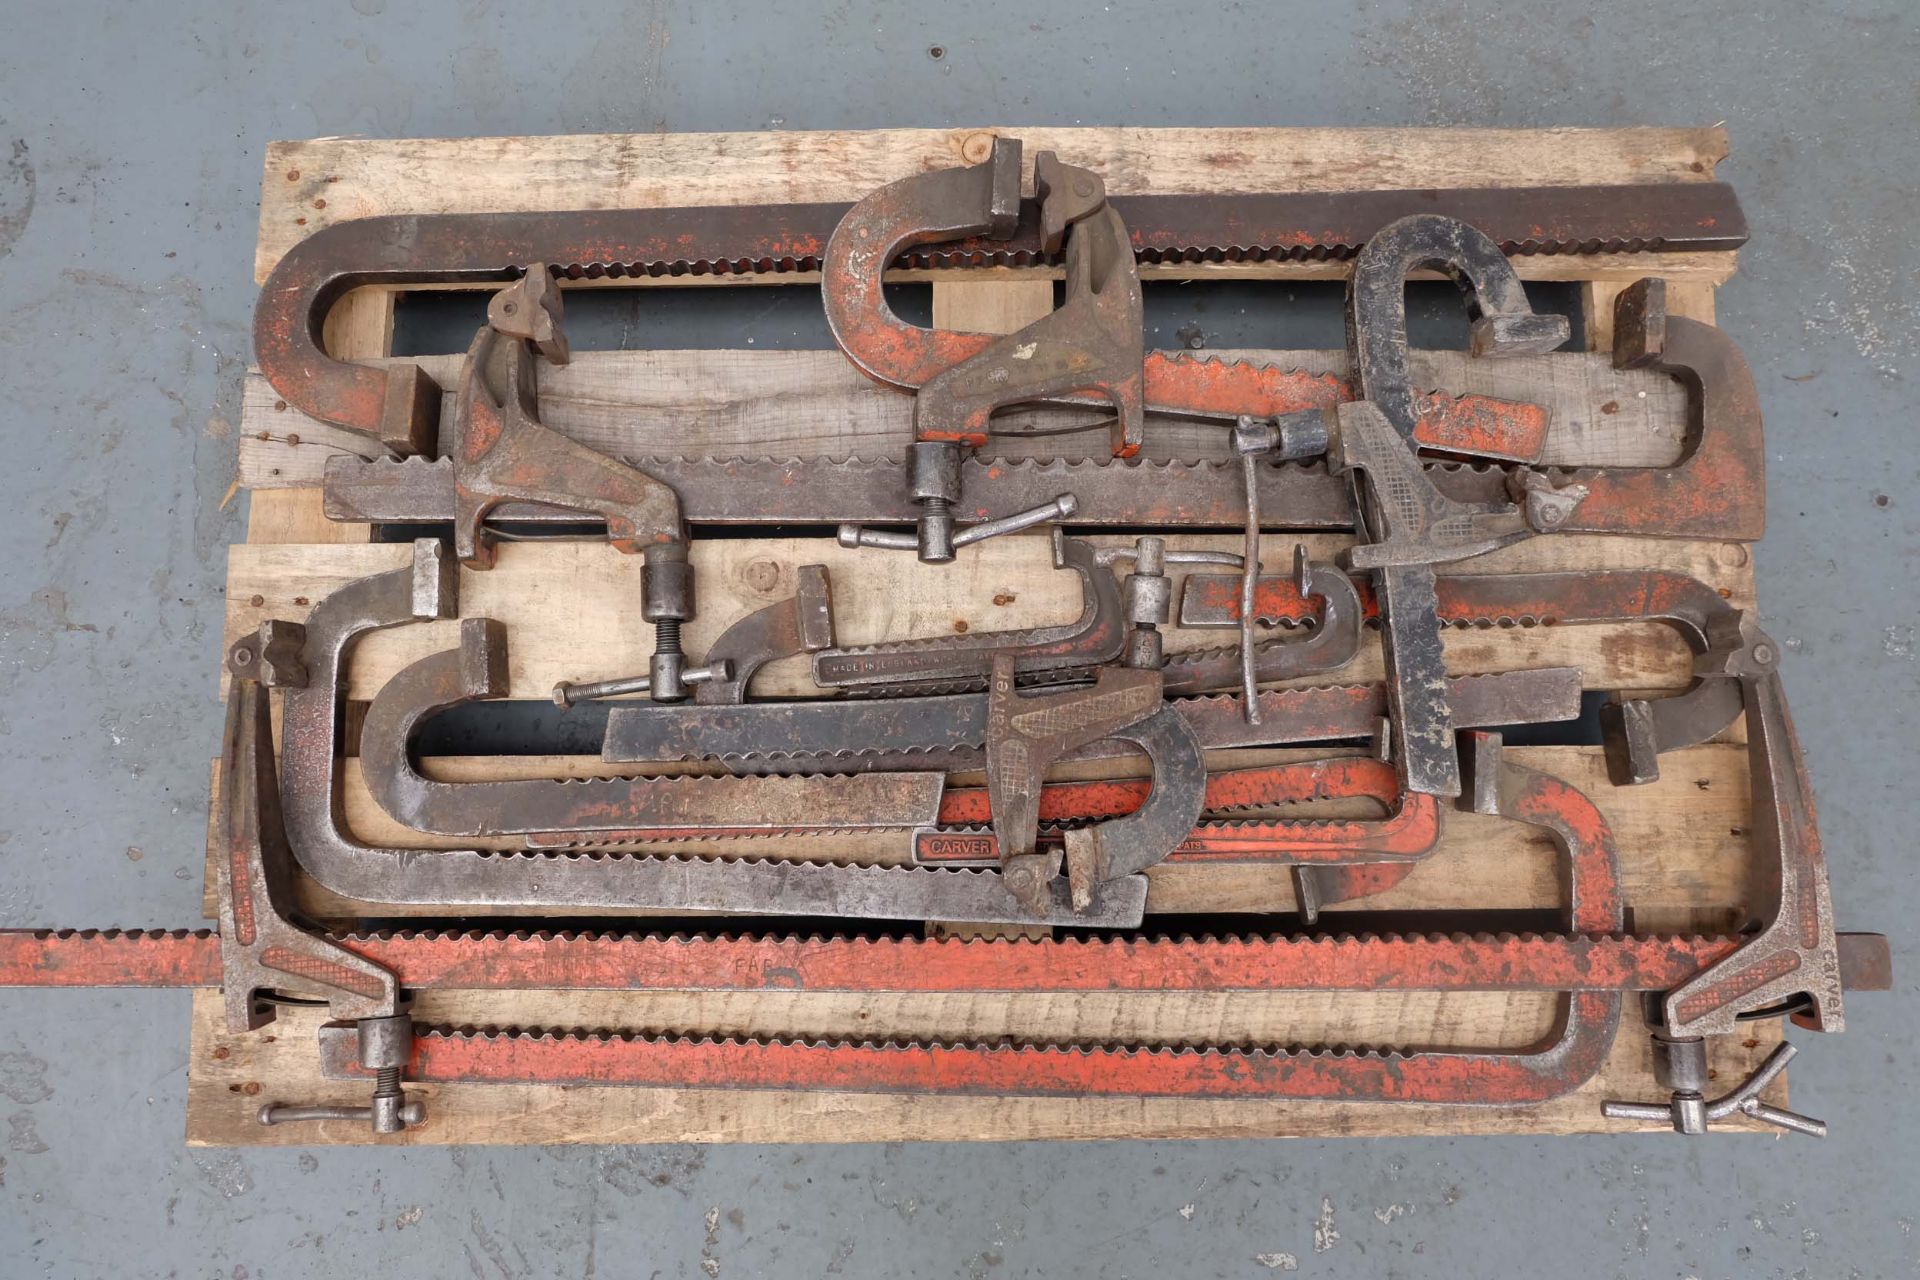 Quantity of Carver Clamps and parts of Carver Clamps.